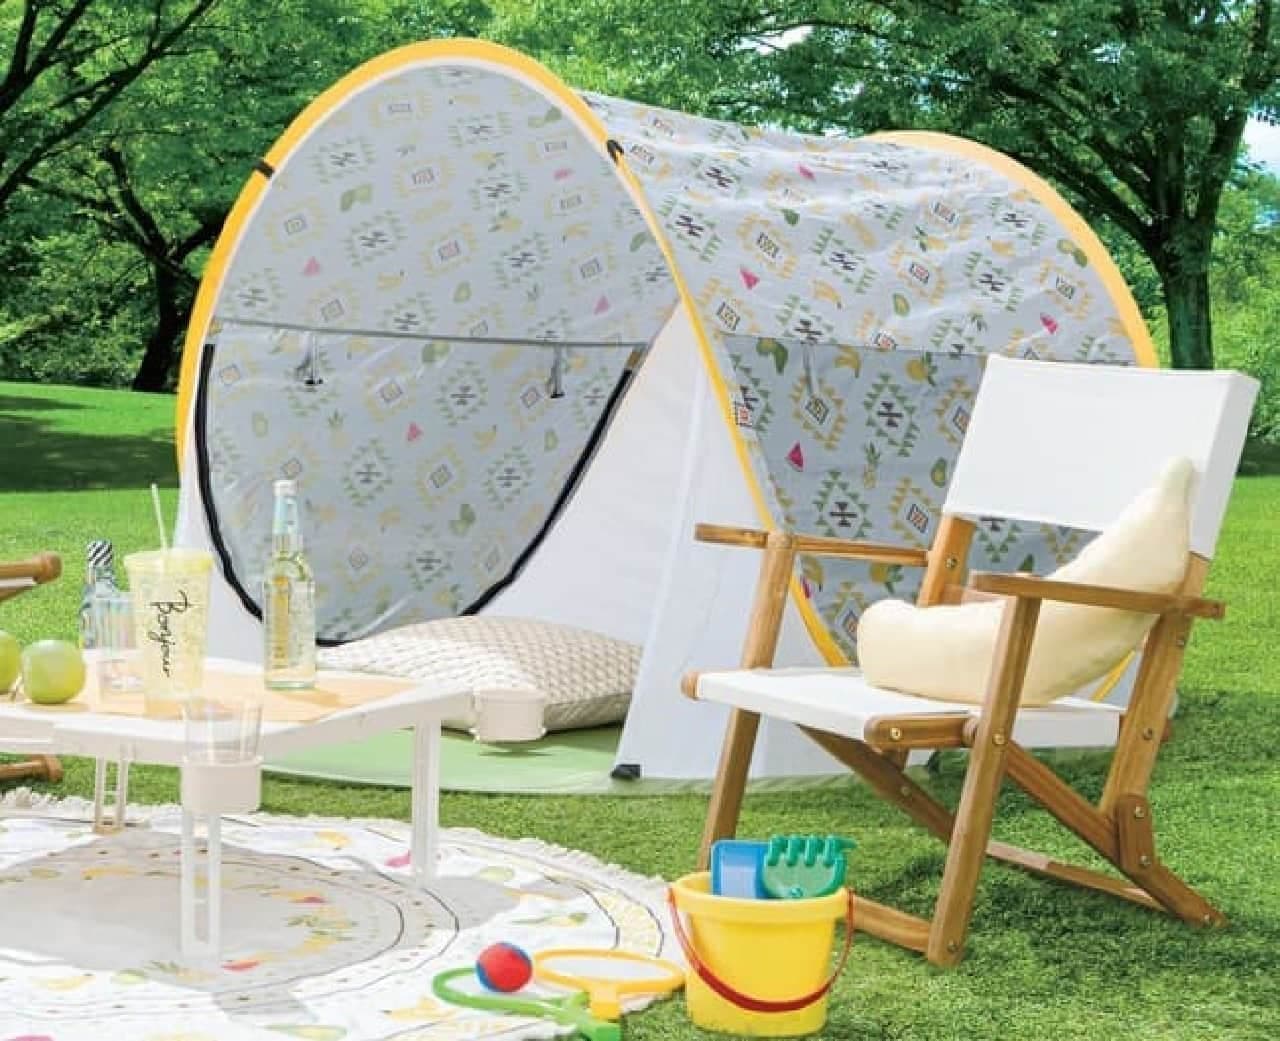 New popular butterfly chairs, fruit-patterned sunshades, leisure tables, etc.